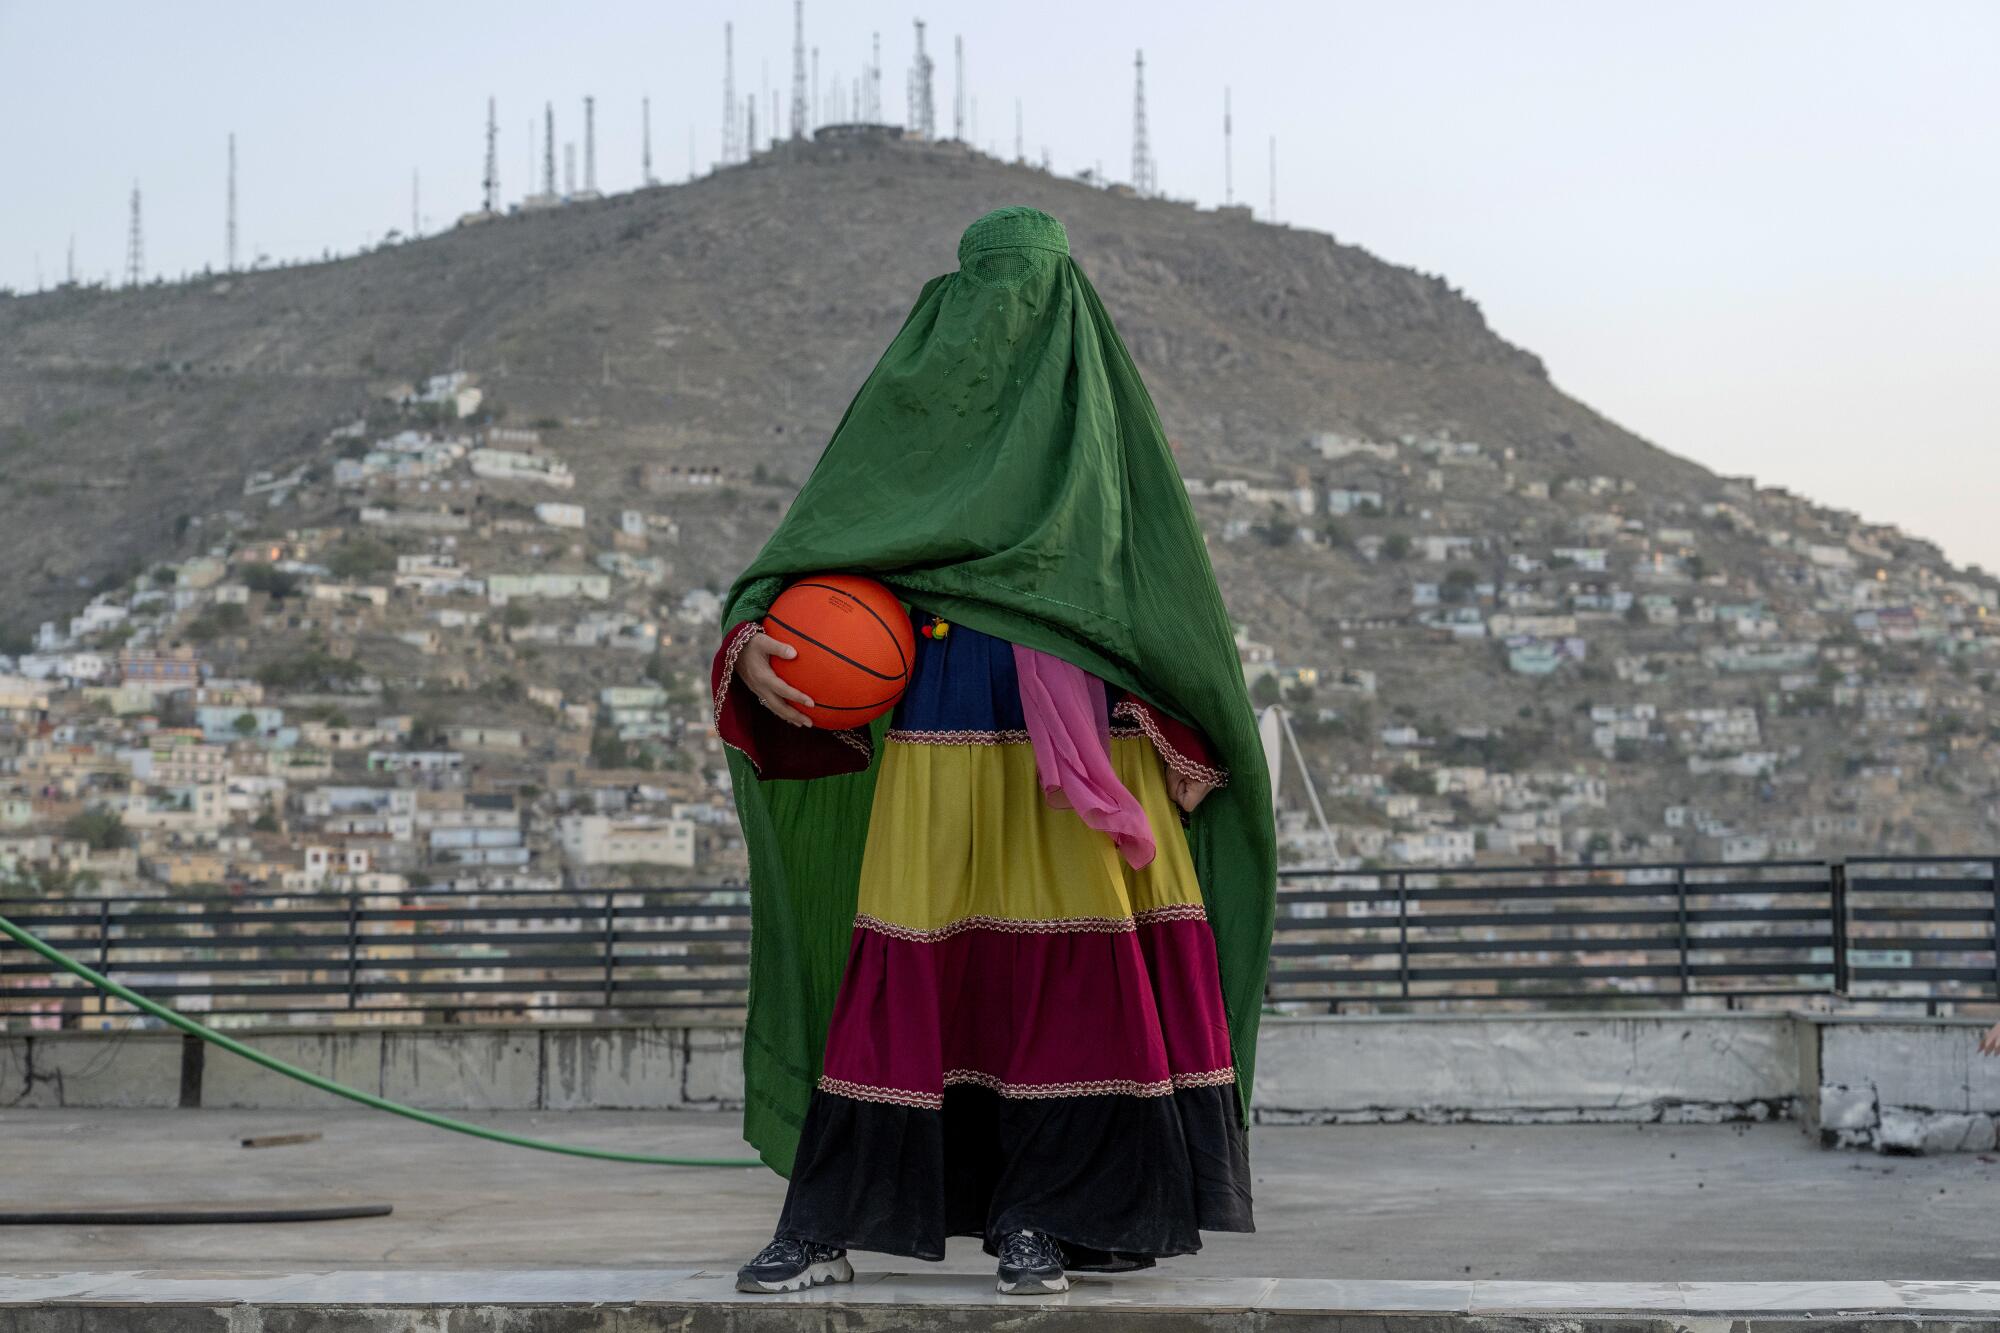 An Afghan woman wearing a green burqa and striped skirt poses with a basketball. 